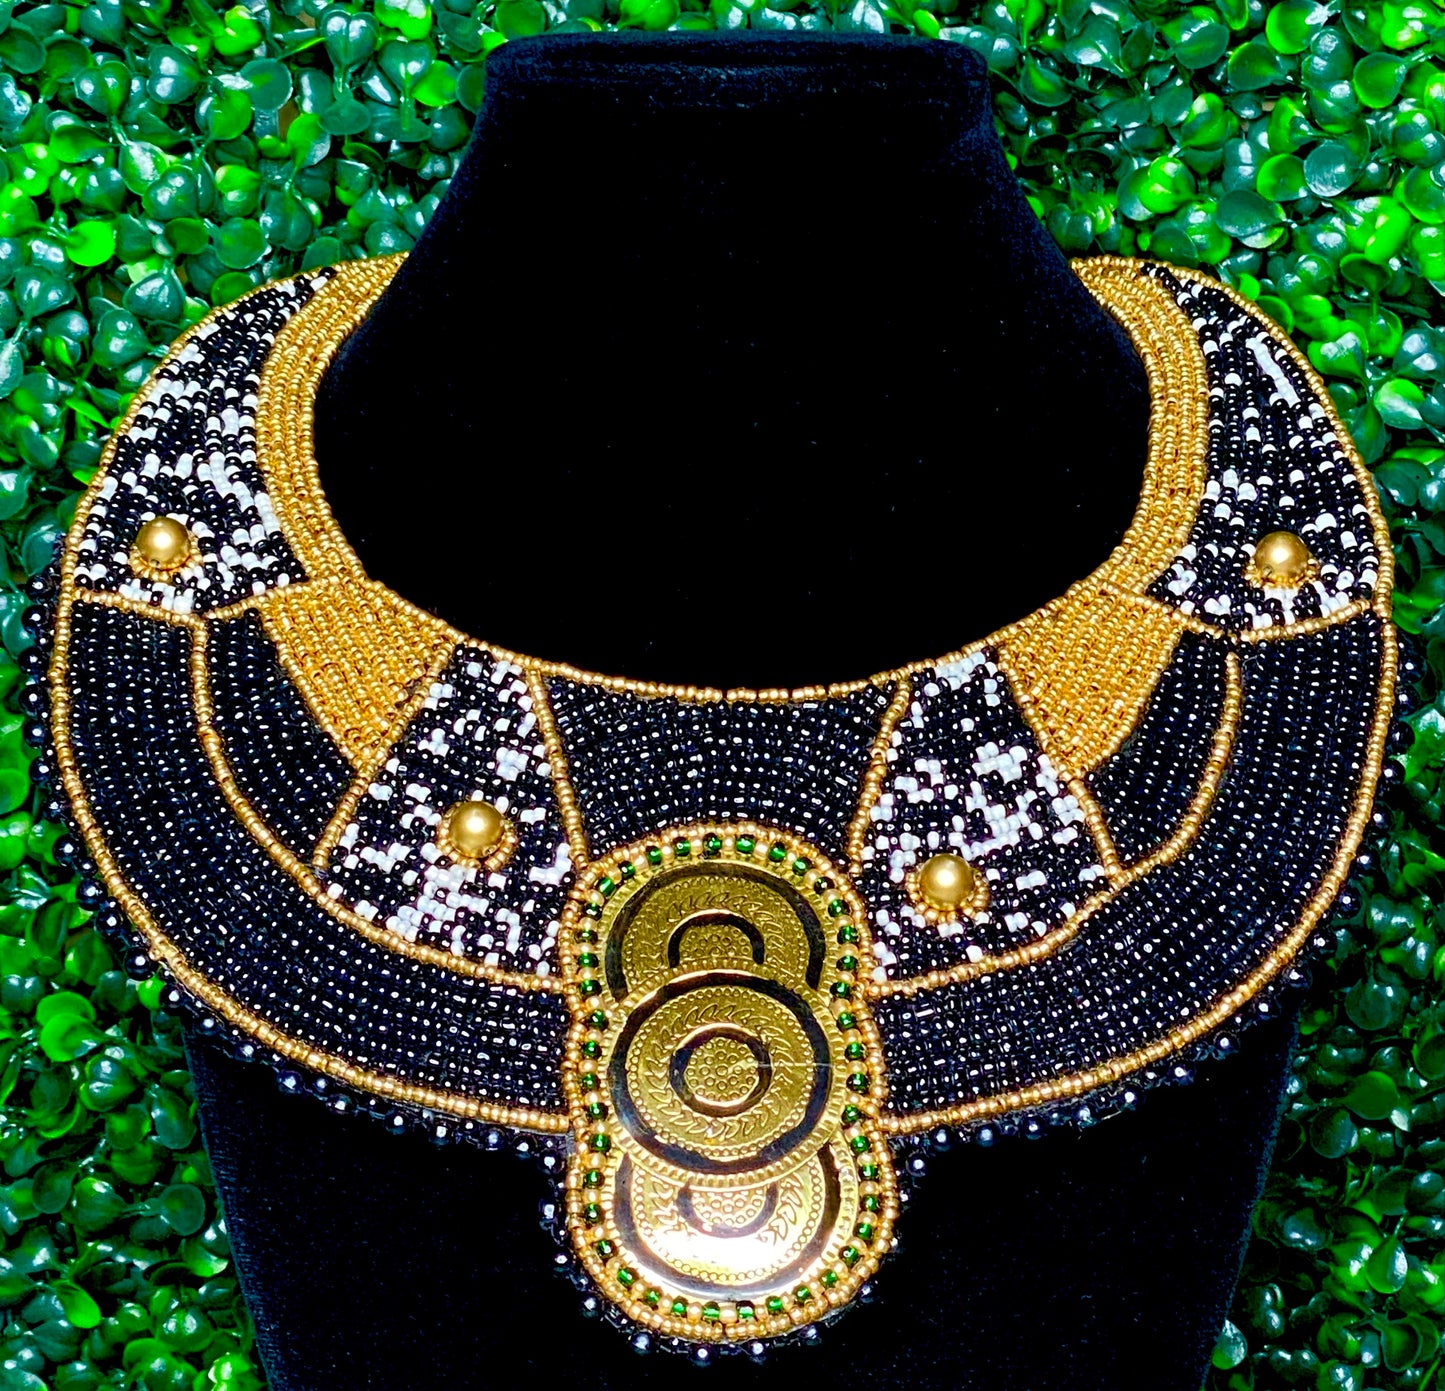 Ladies' Black and Gold Beaded Bib Necklace